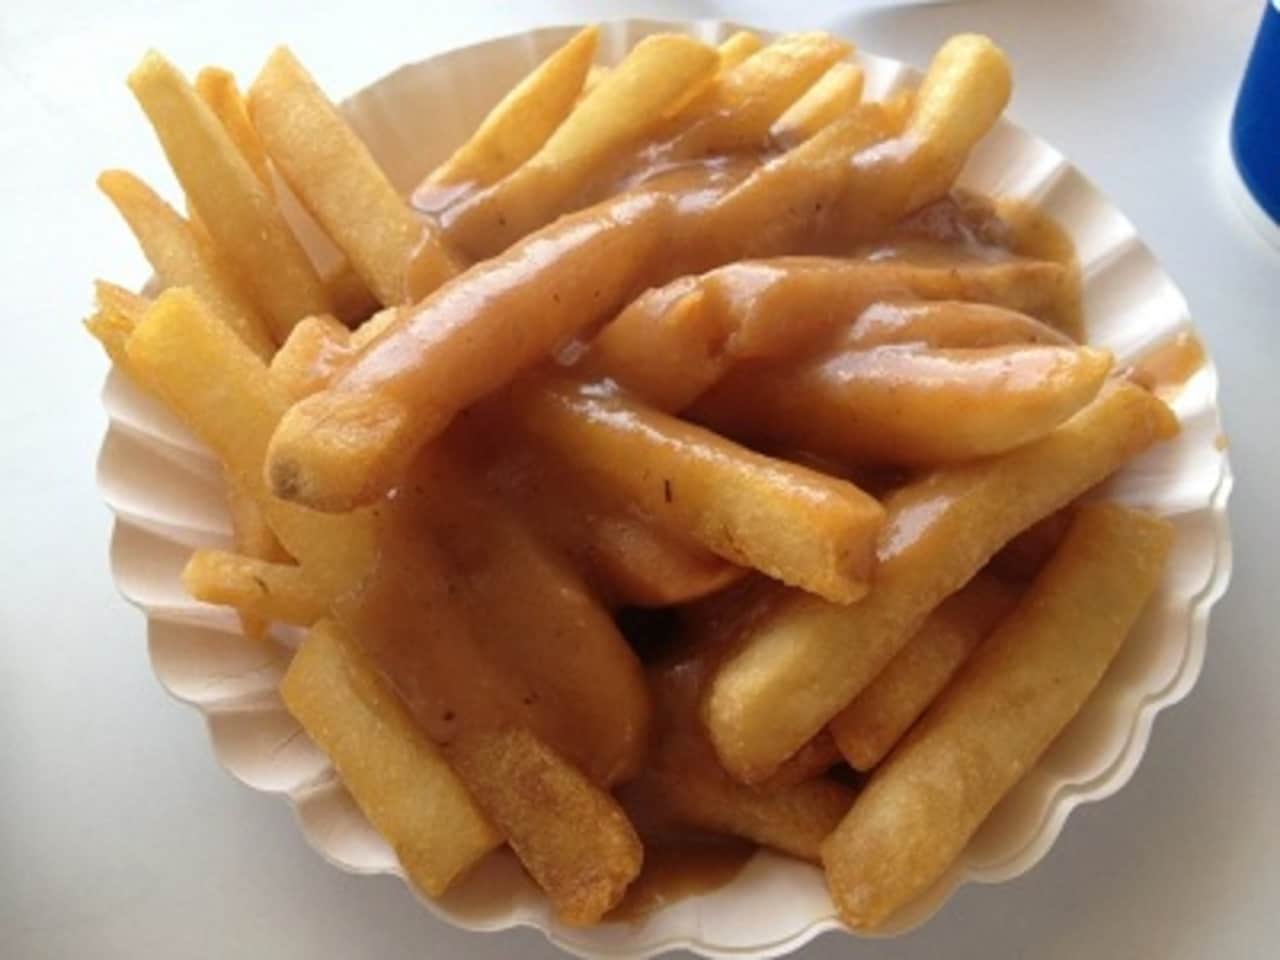 The gravy-soaked fries at Rutt's Hut in Clifton go good with their famous "rippers," hot dogs deep fried until their casings split and crack.